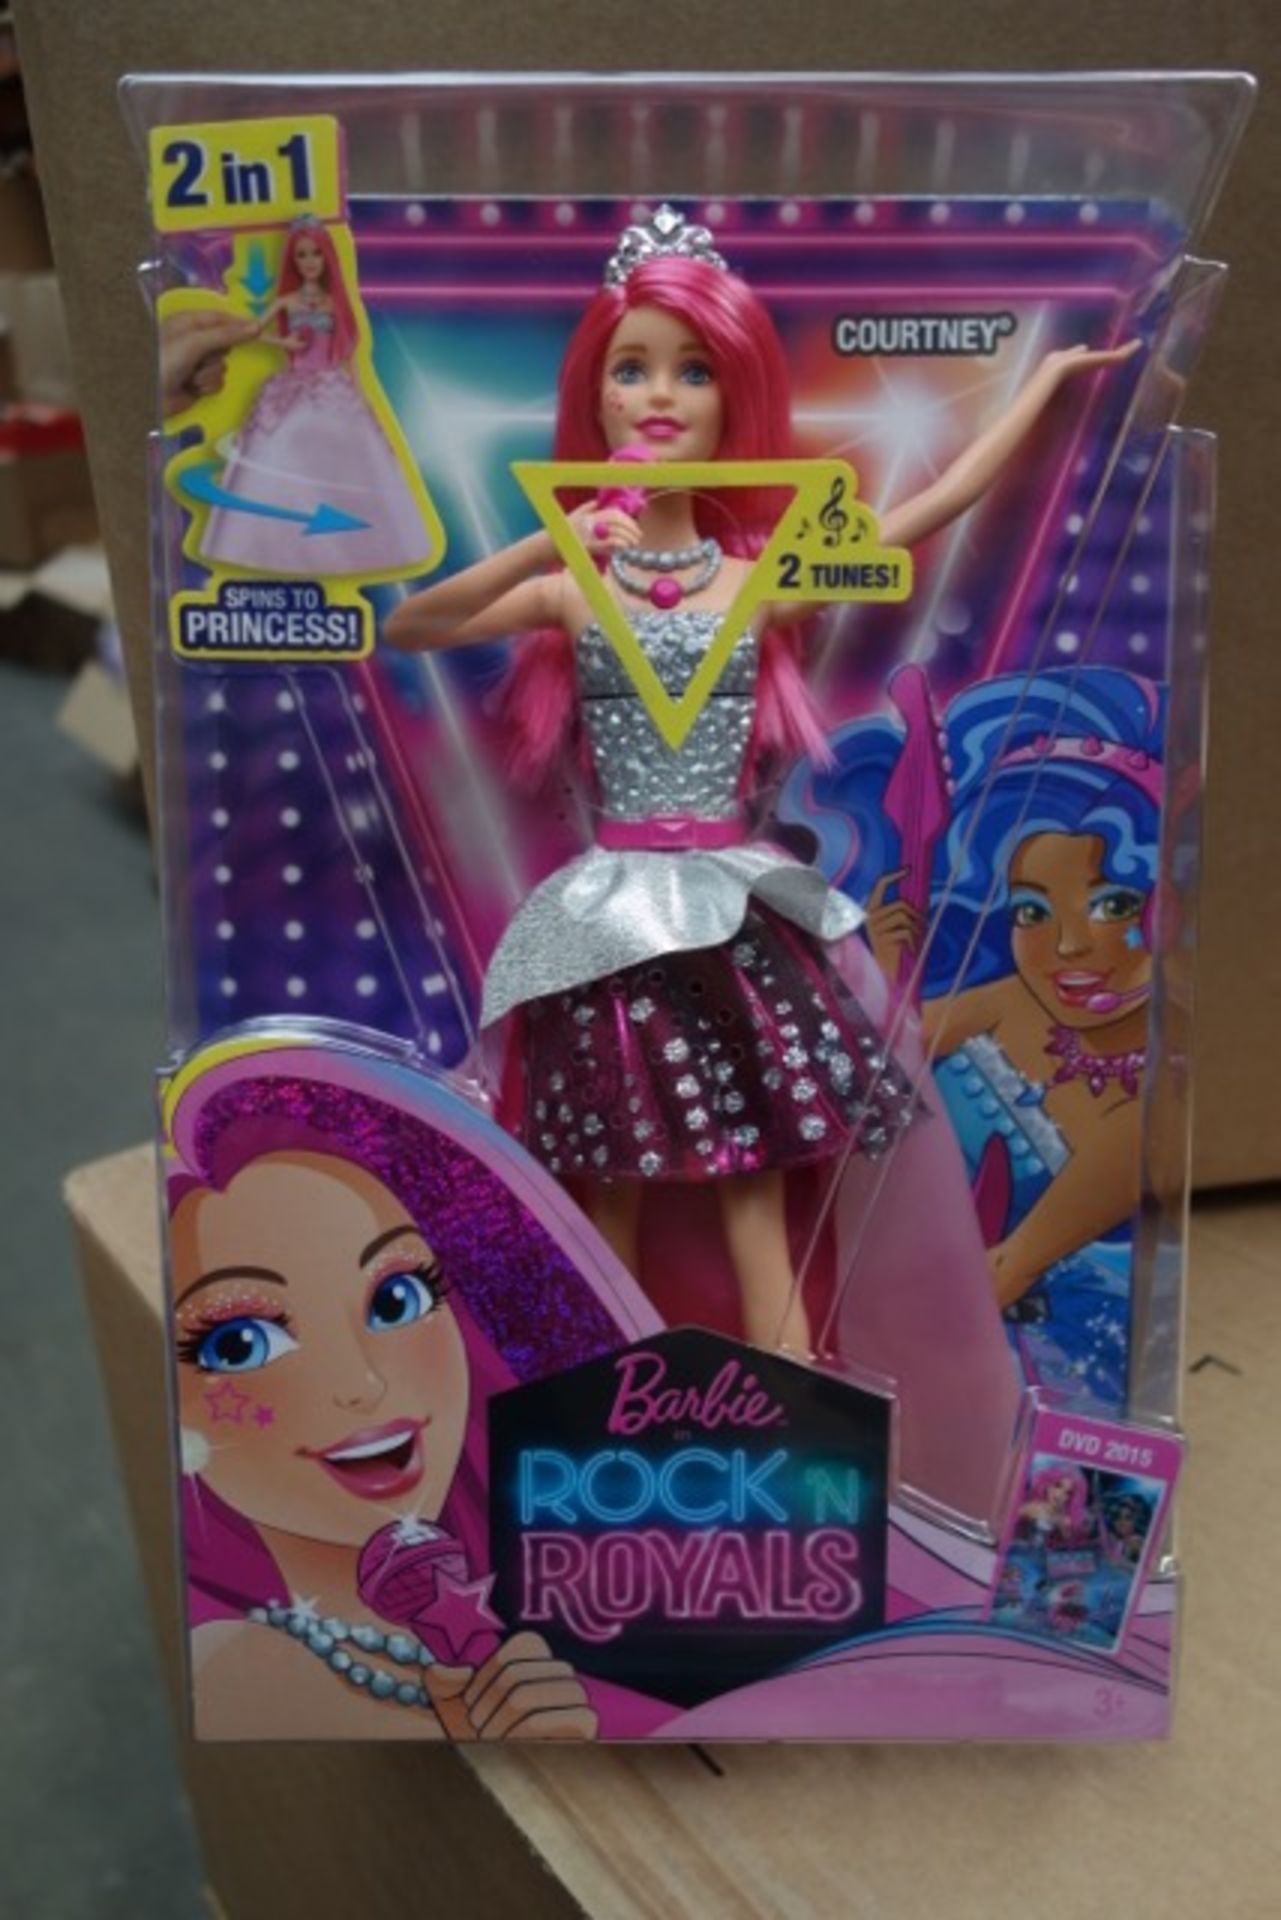 12 x Brand New - Barbie Rock 'n Royals 2 in 1 Doll - Courney.